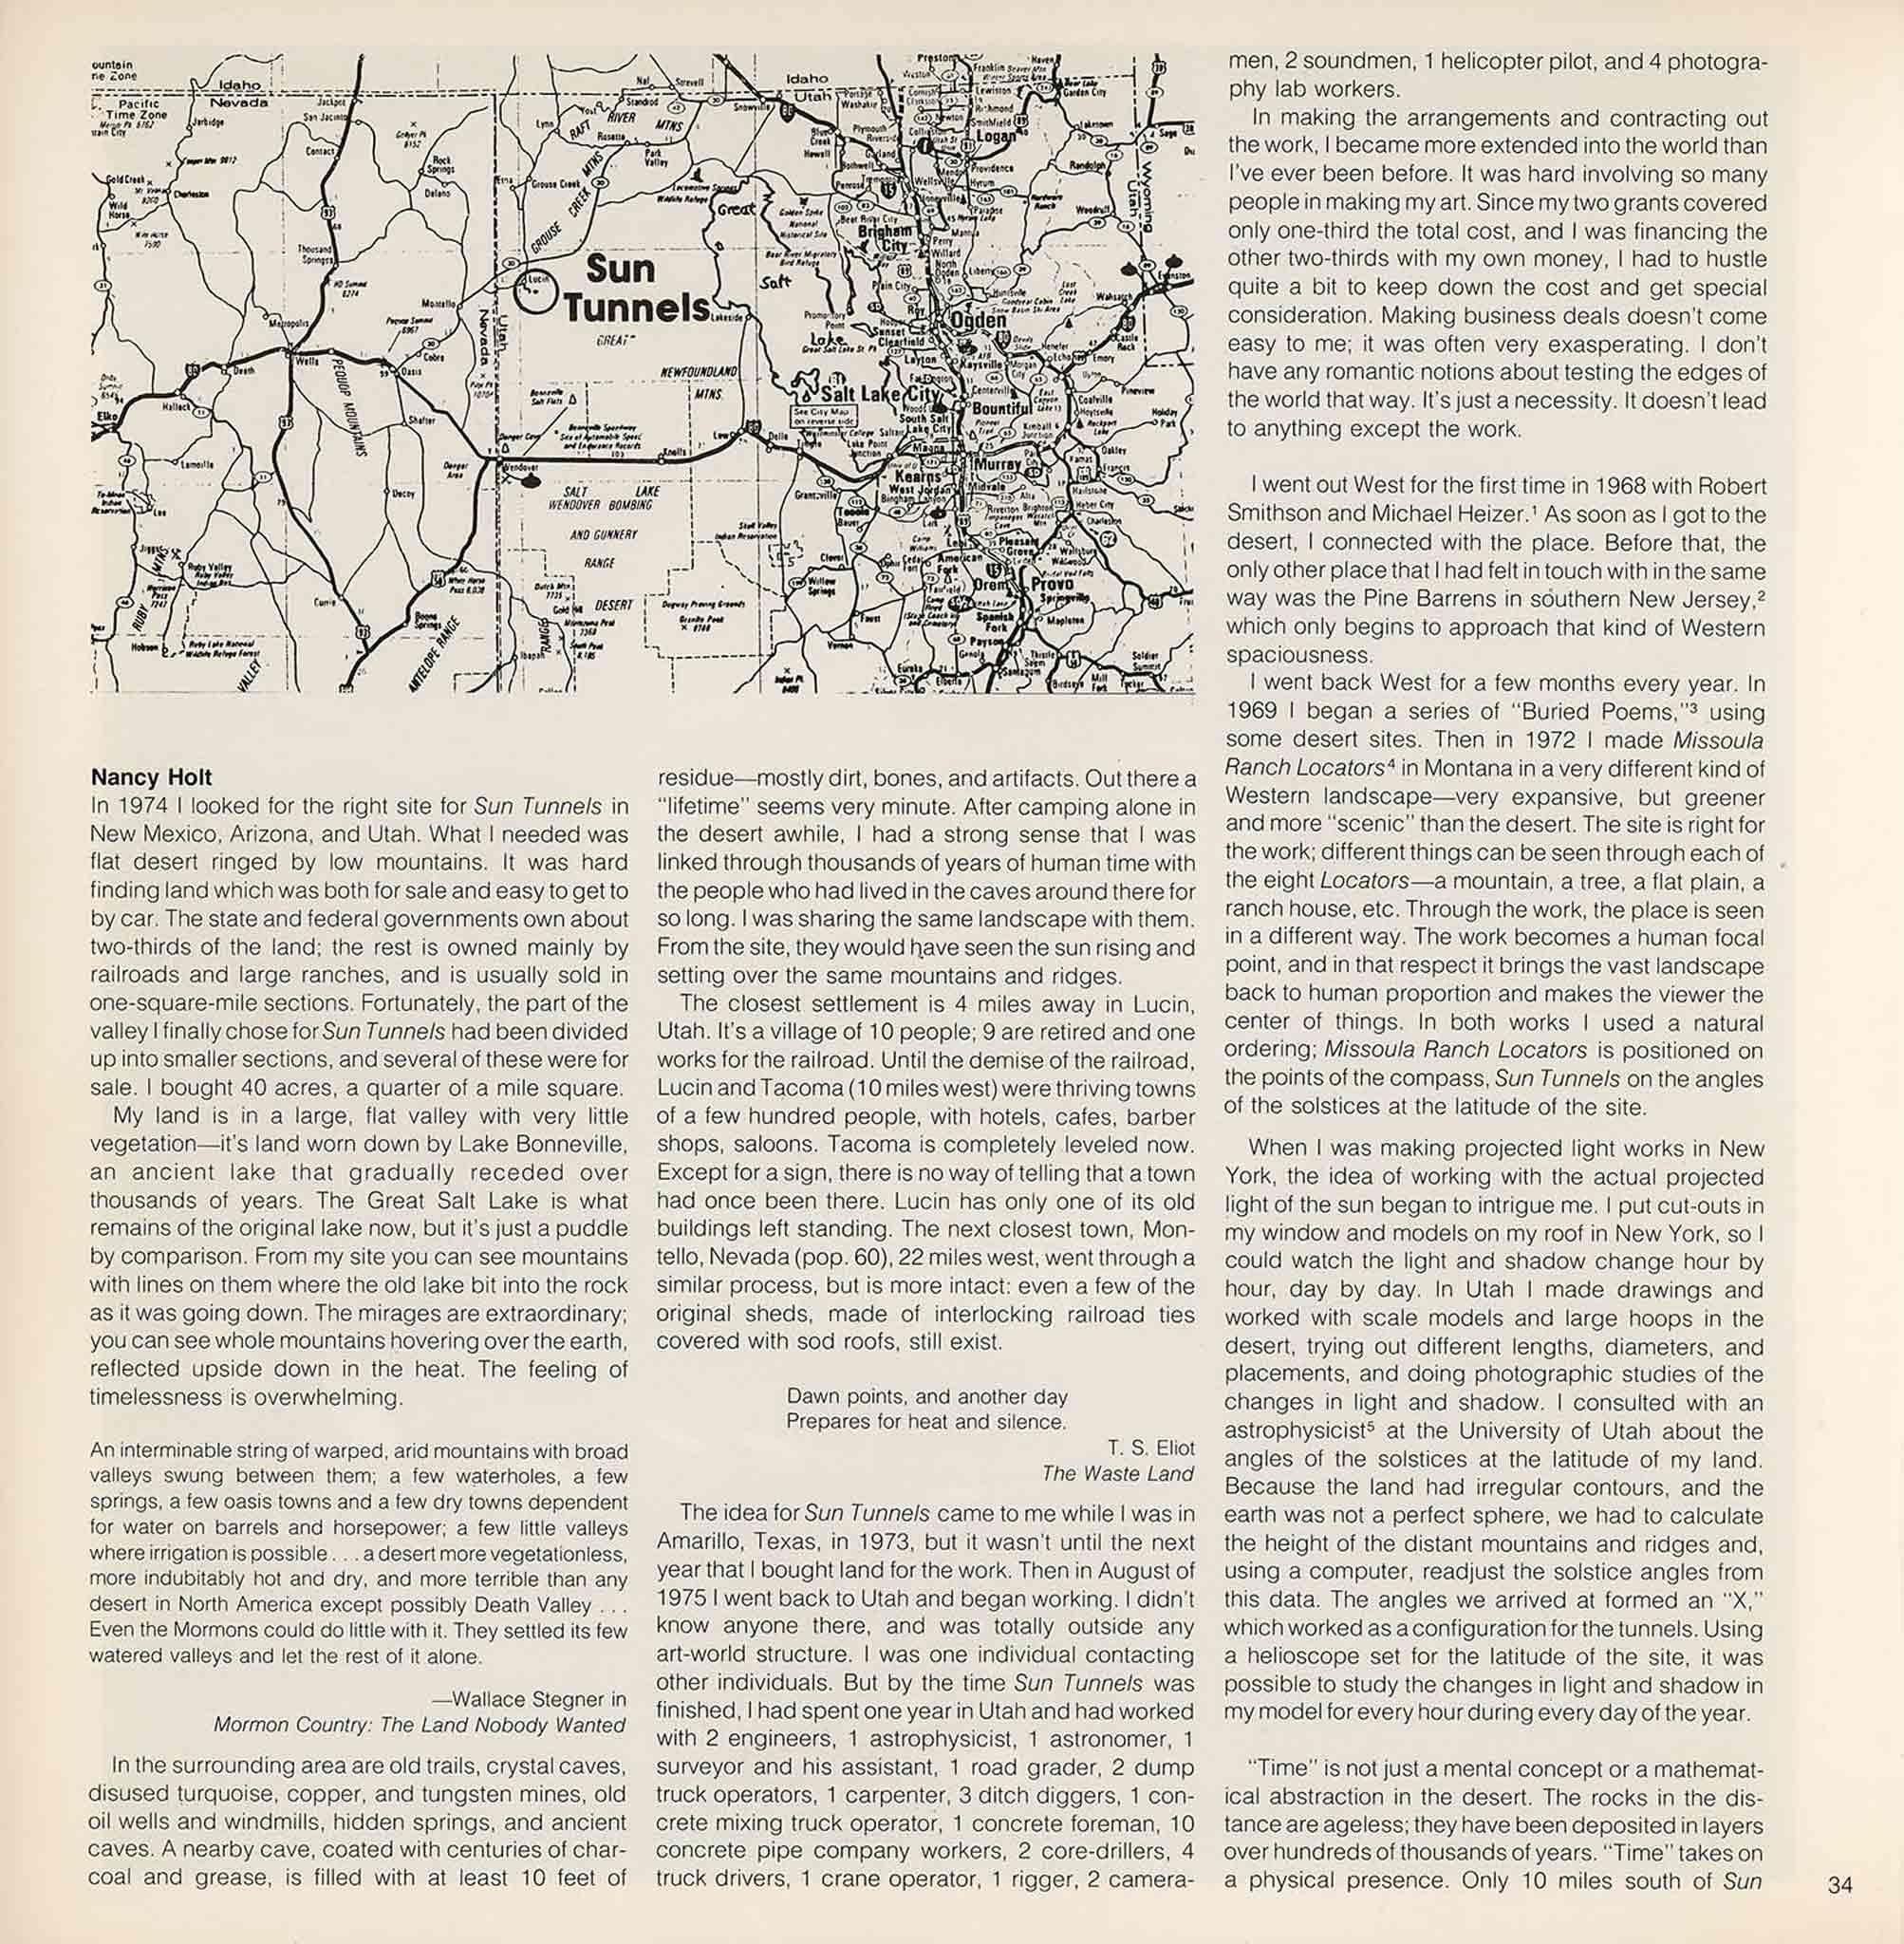 Magazine layout with map of utah in top left and small text elsewhere.